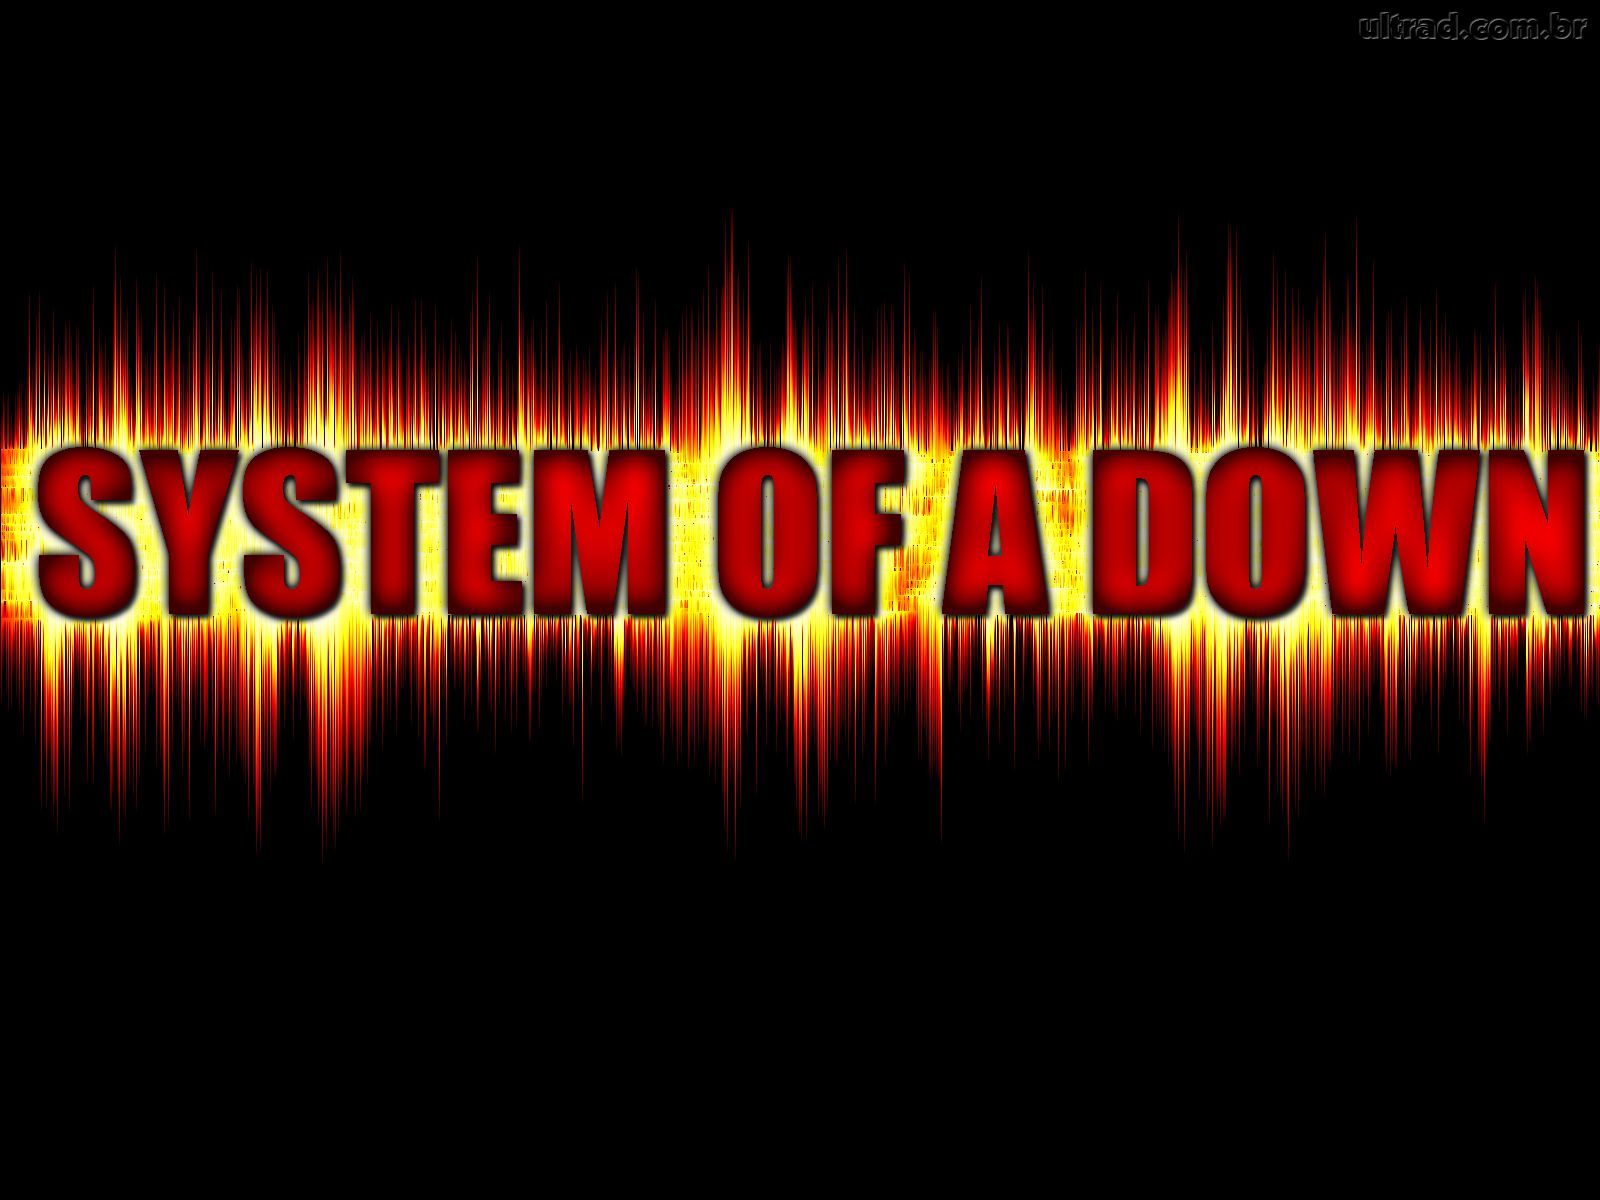 Paper Fresh Singer: System Of A Down - Wallpaper Gallery